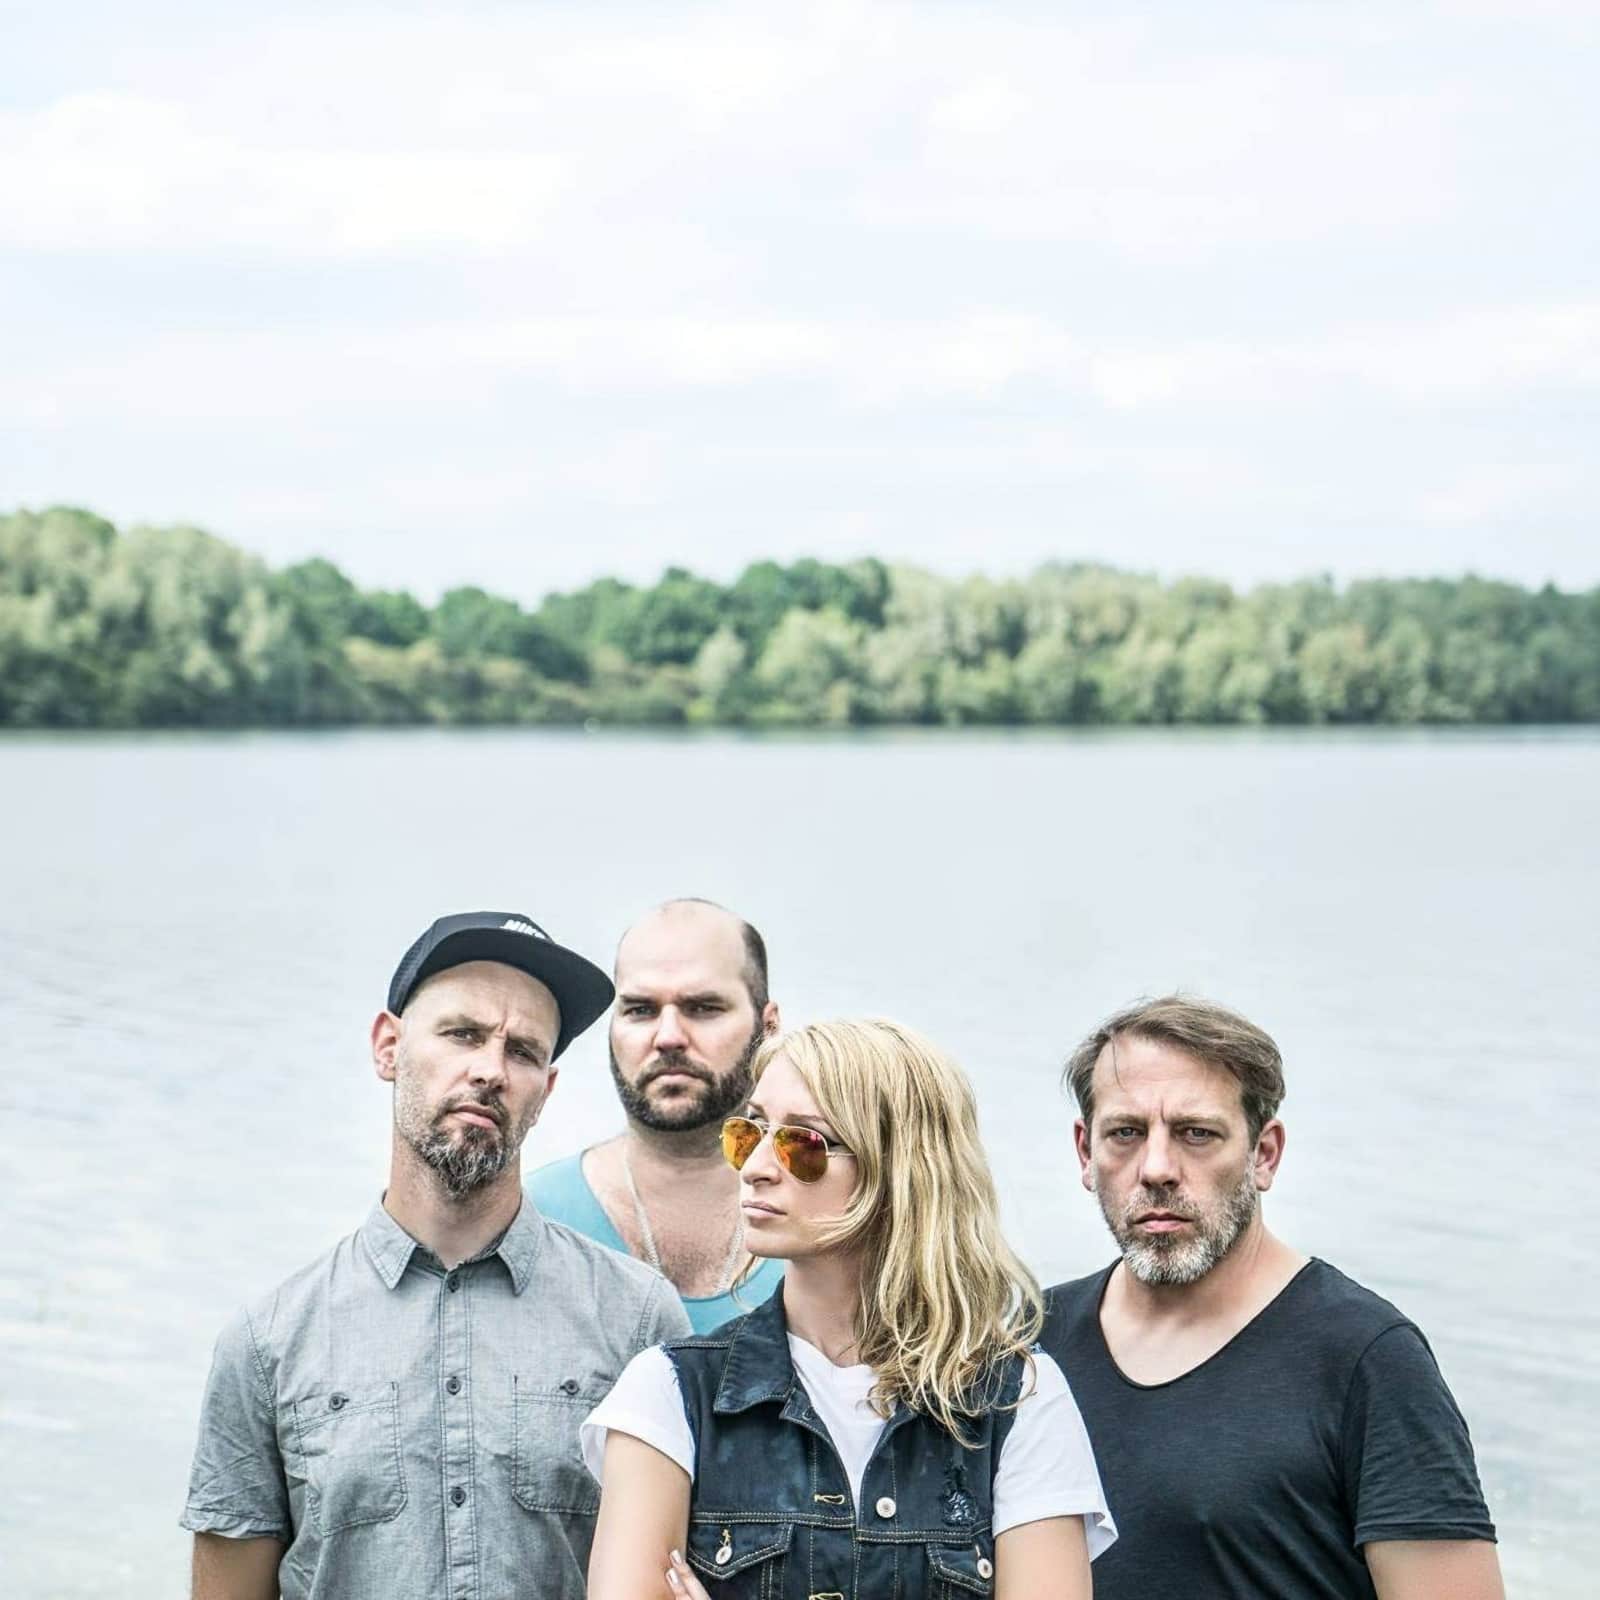 Guano Apes at Grosse Freiheit 36 Tickets